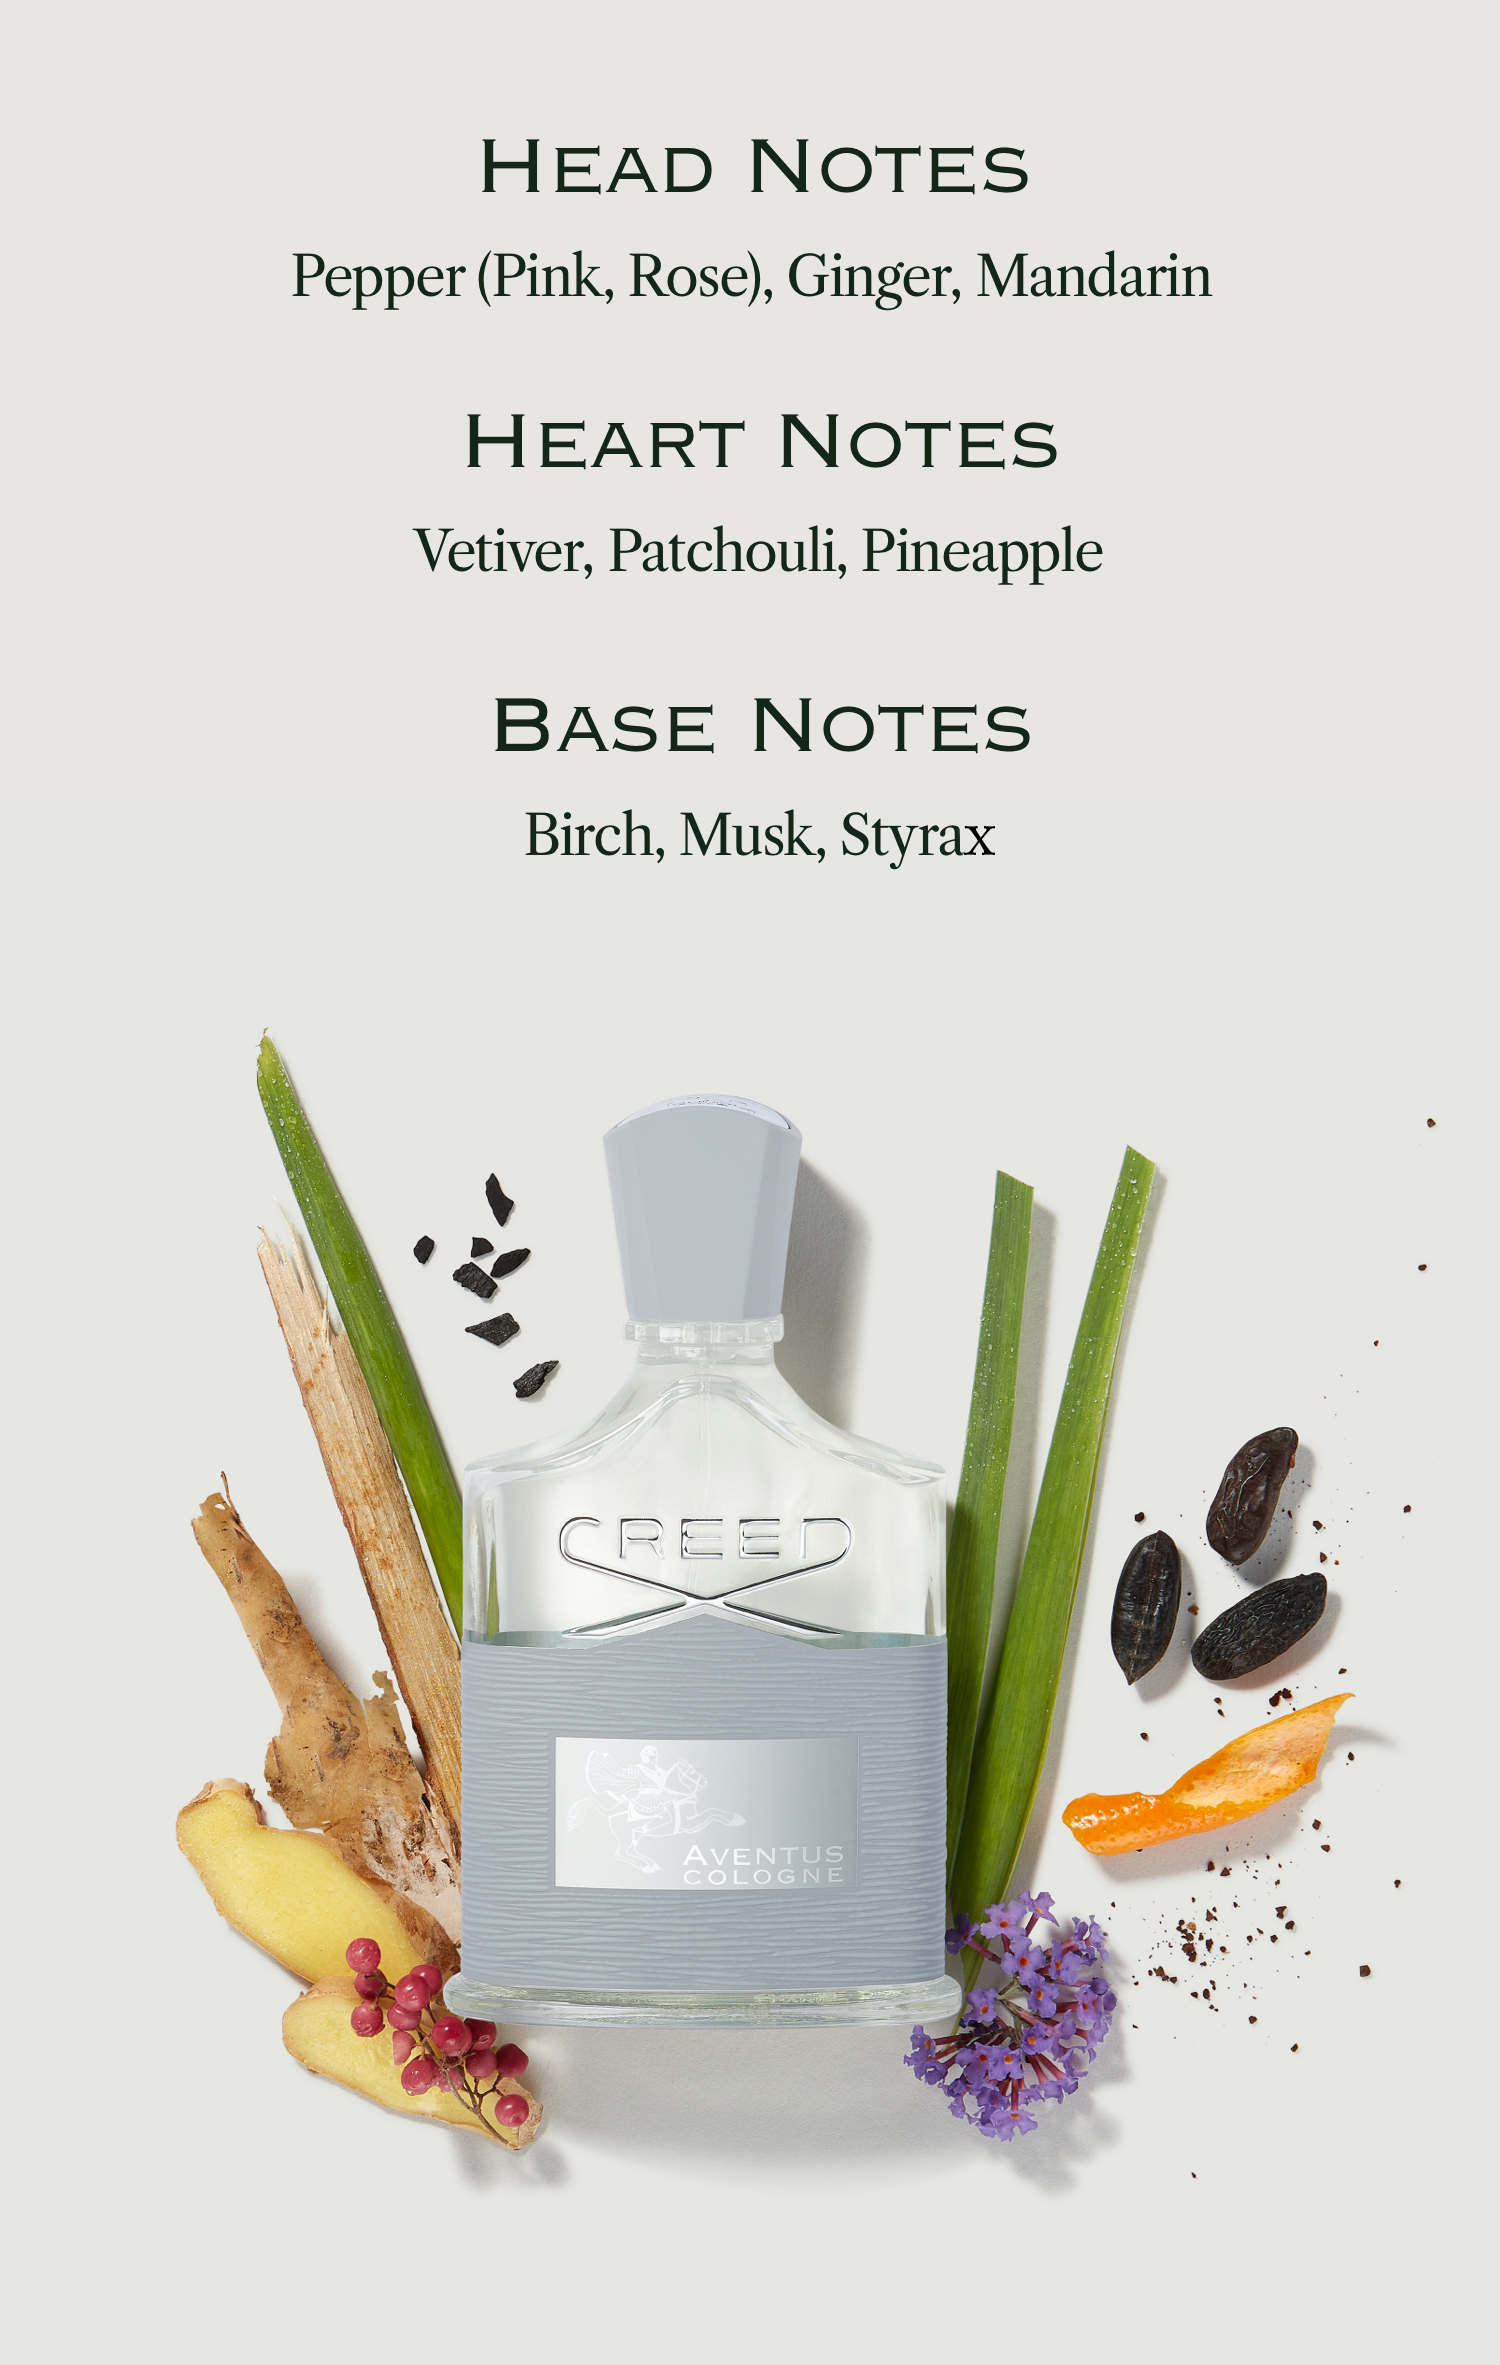 Head notes pepper (pink, rose) giner, mandarin heart notes vetiver, patchouli, pineapple base notes birch musk styrax